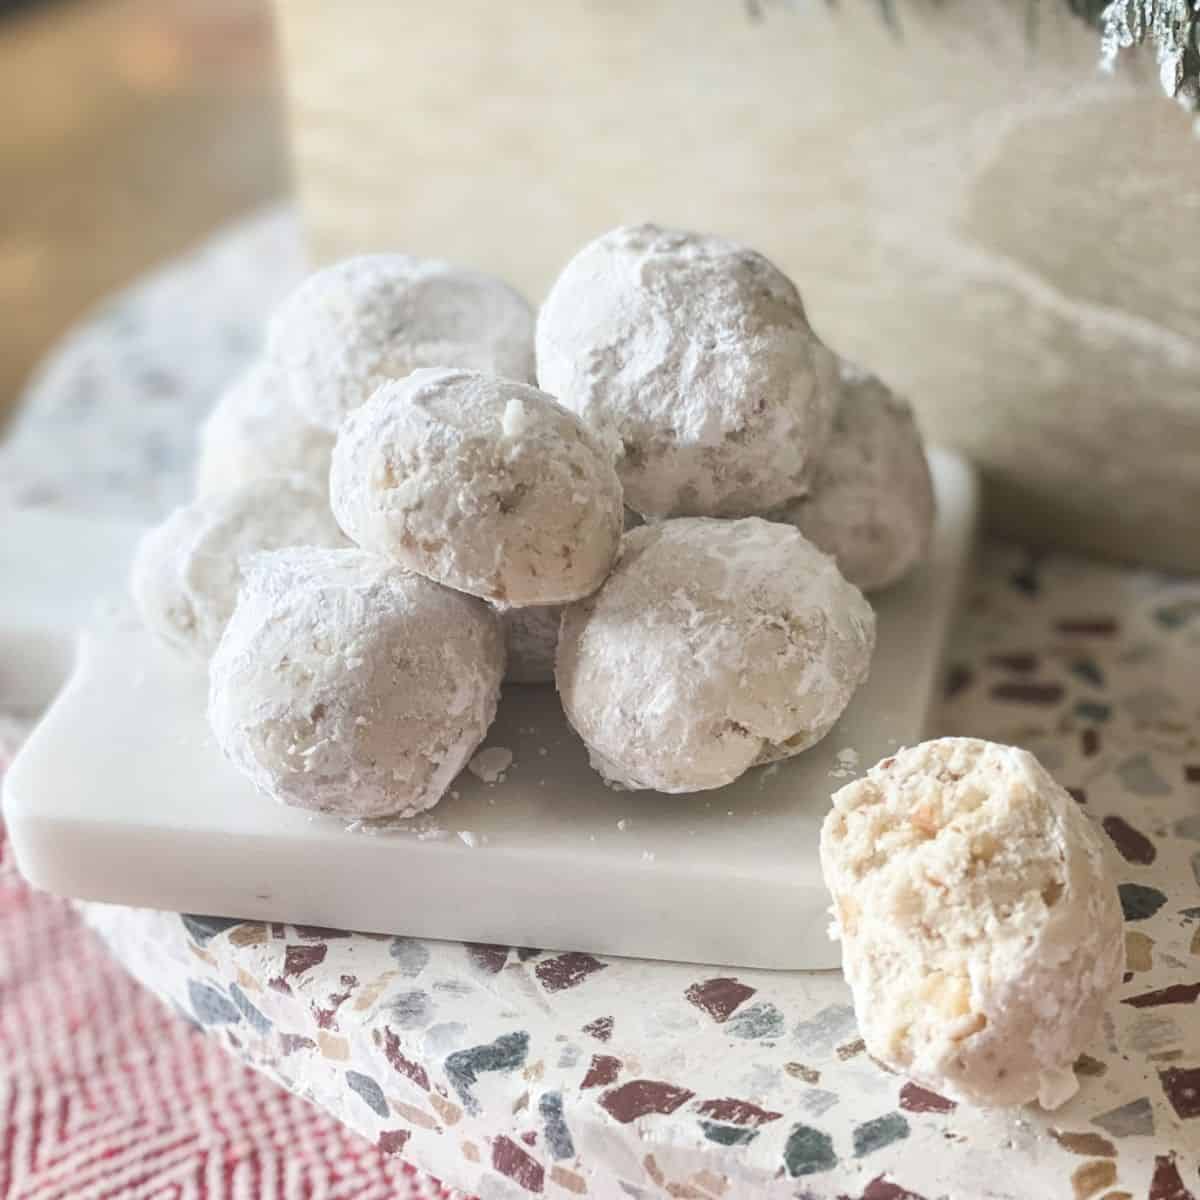 https://www.thisvivaciouslife.com/wp-content/uploads/2016/12/Gluten-Free-Mexican-Wedding-Cookies-square-.jpg